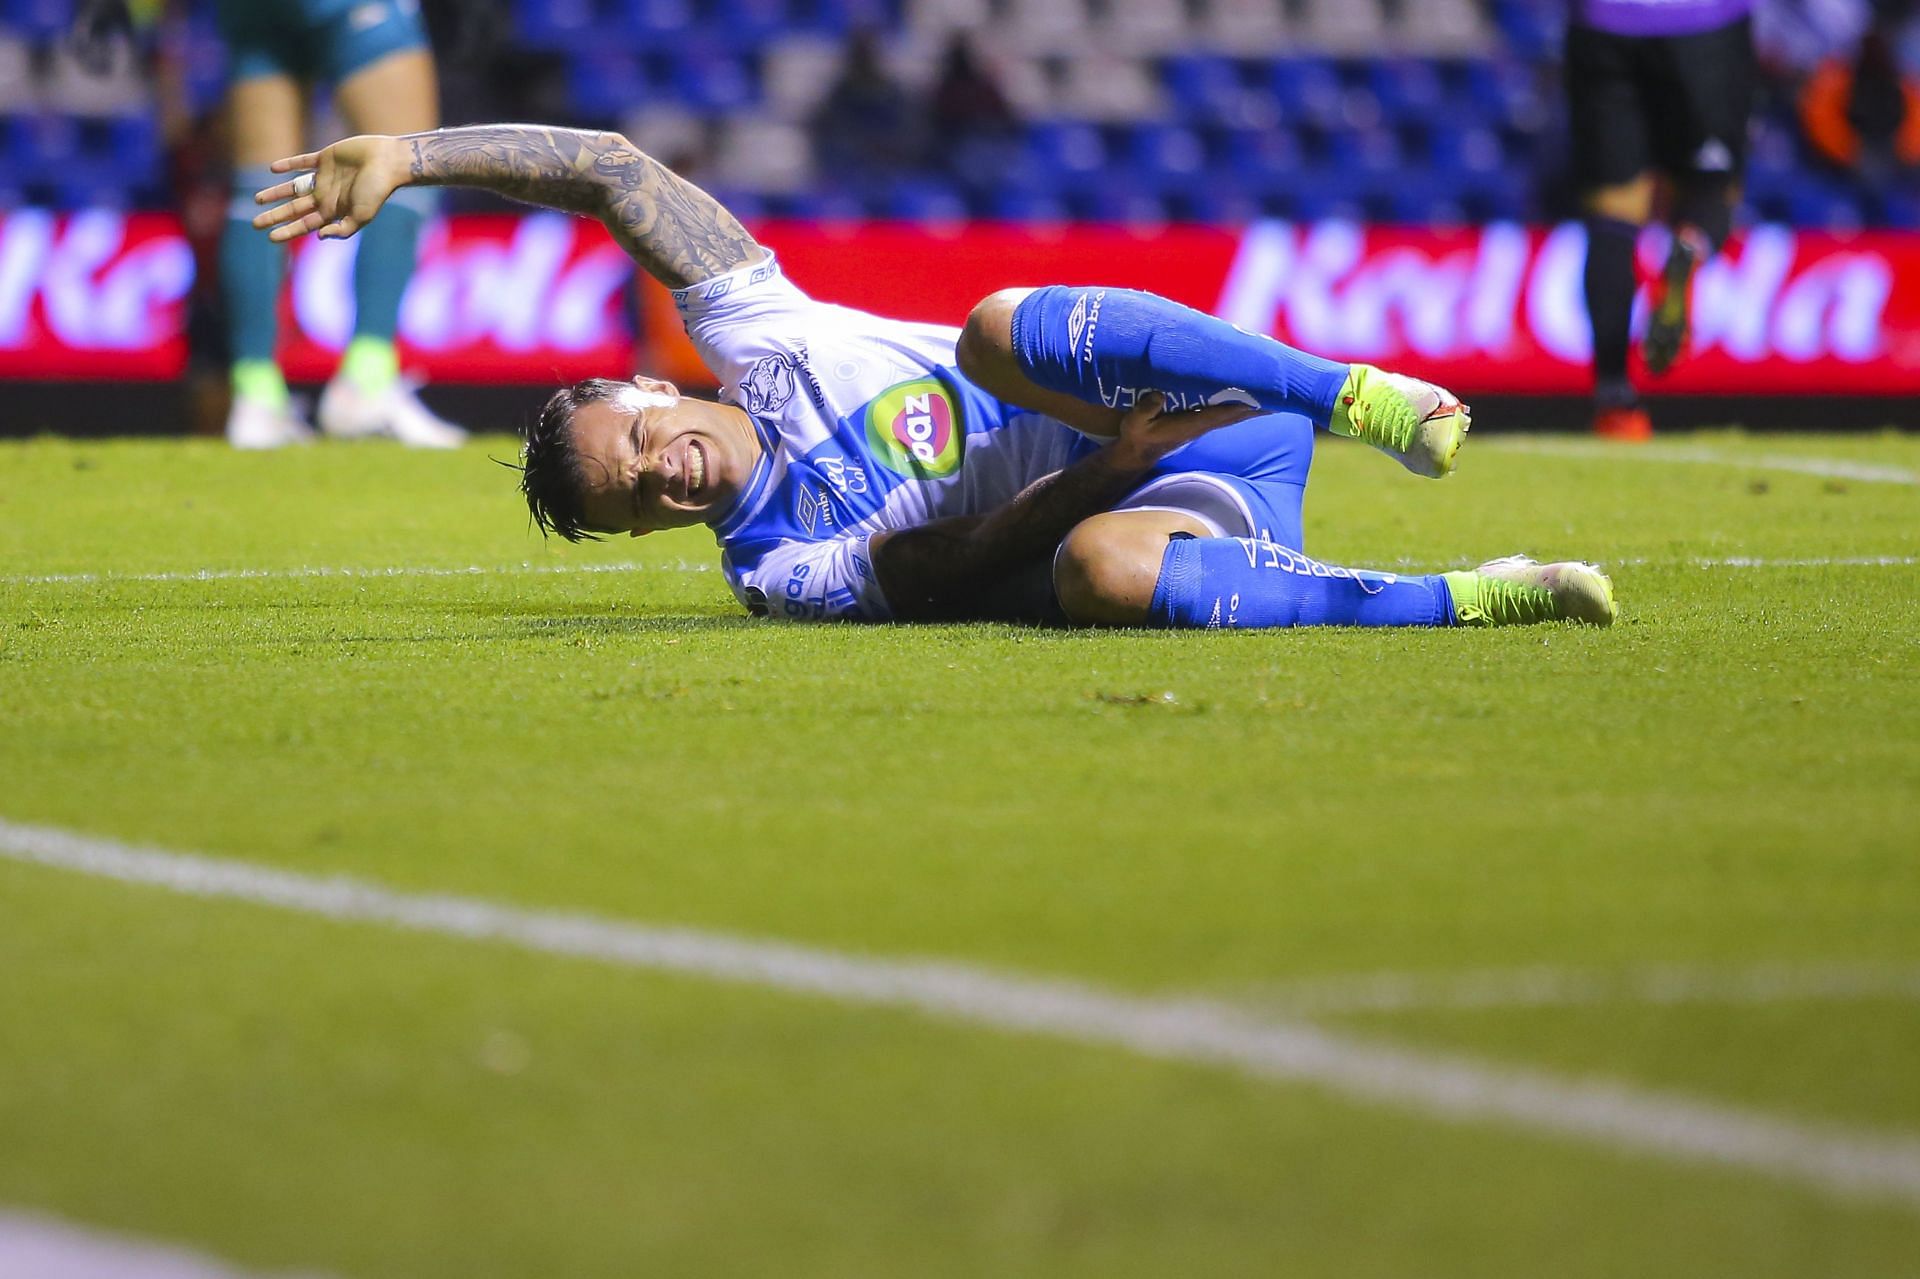 Tabo will be a huge miss for Cruz Azul